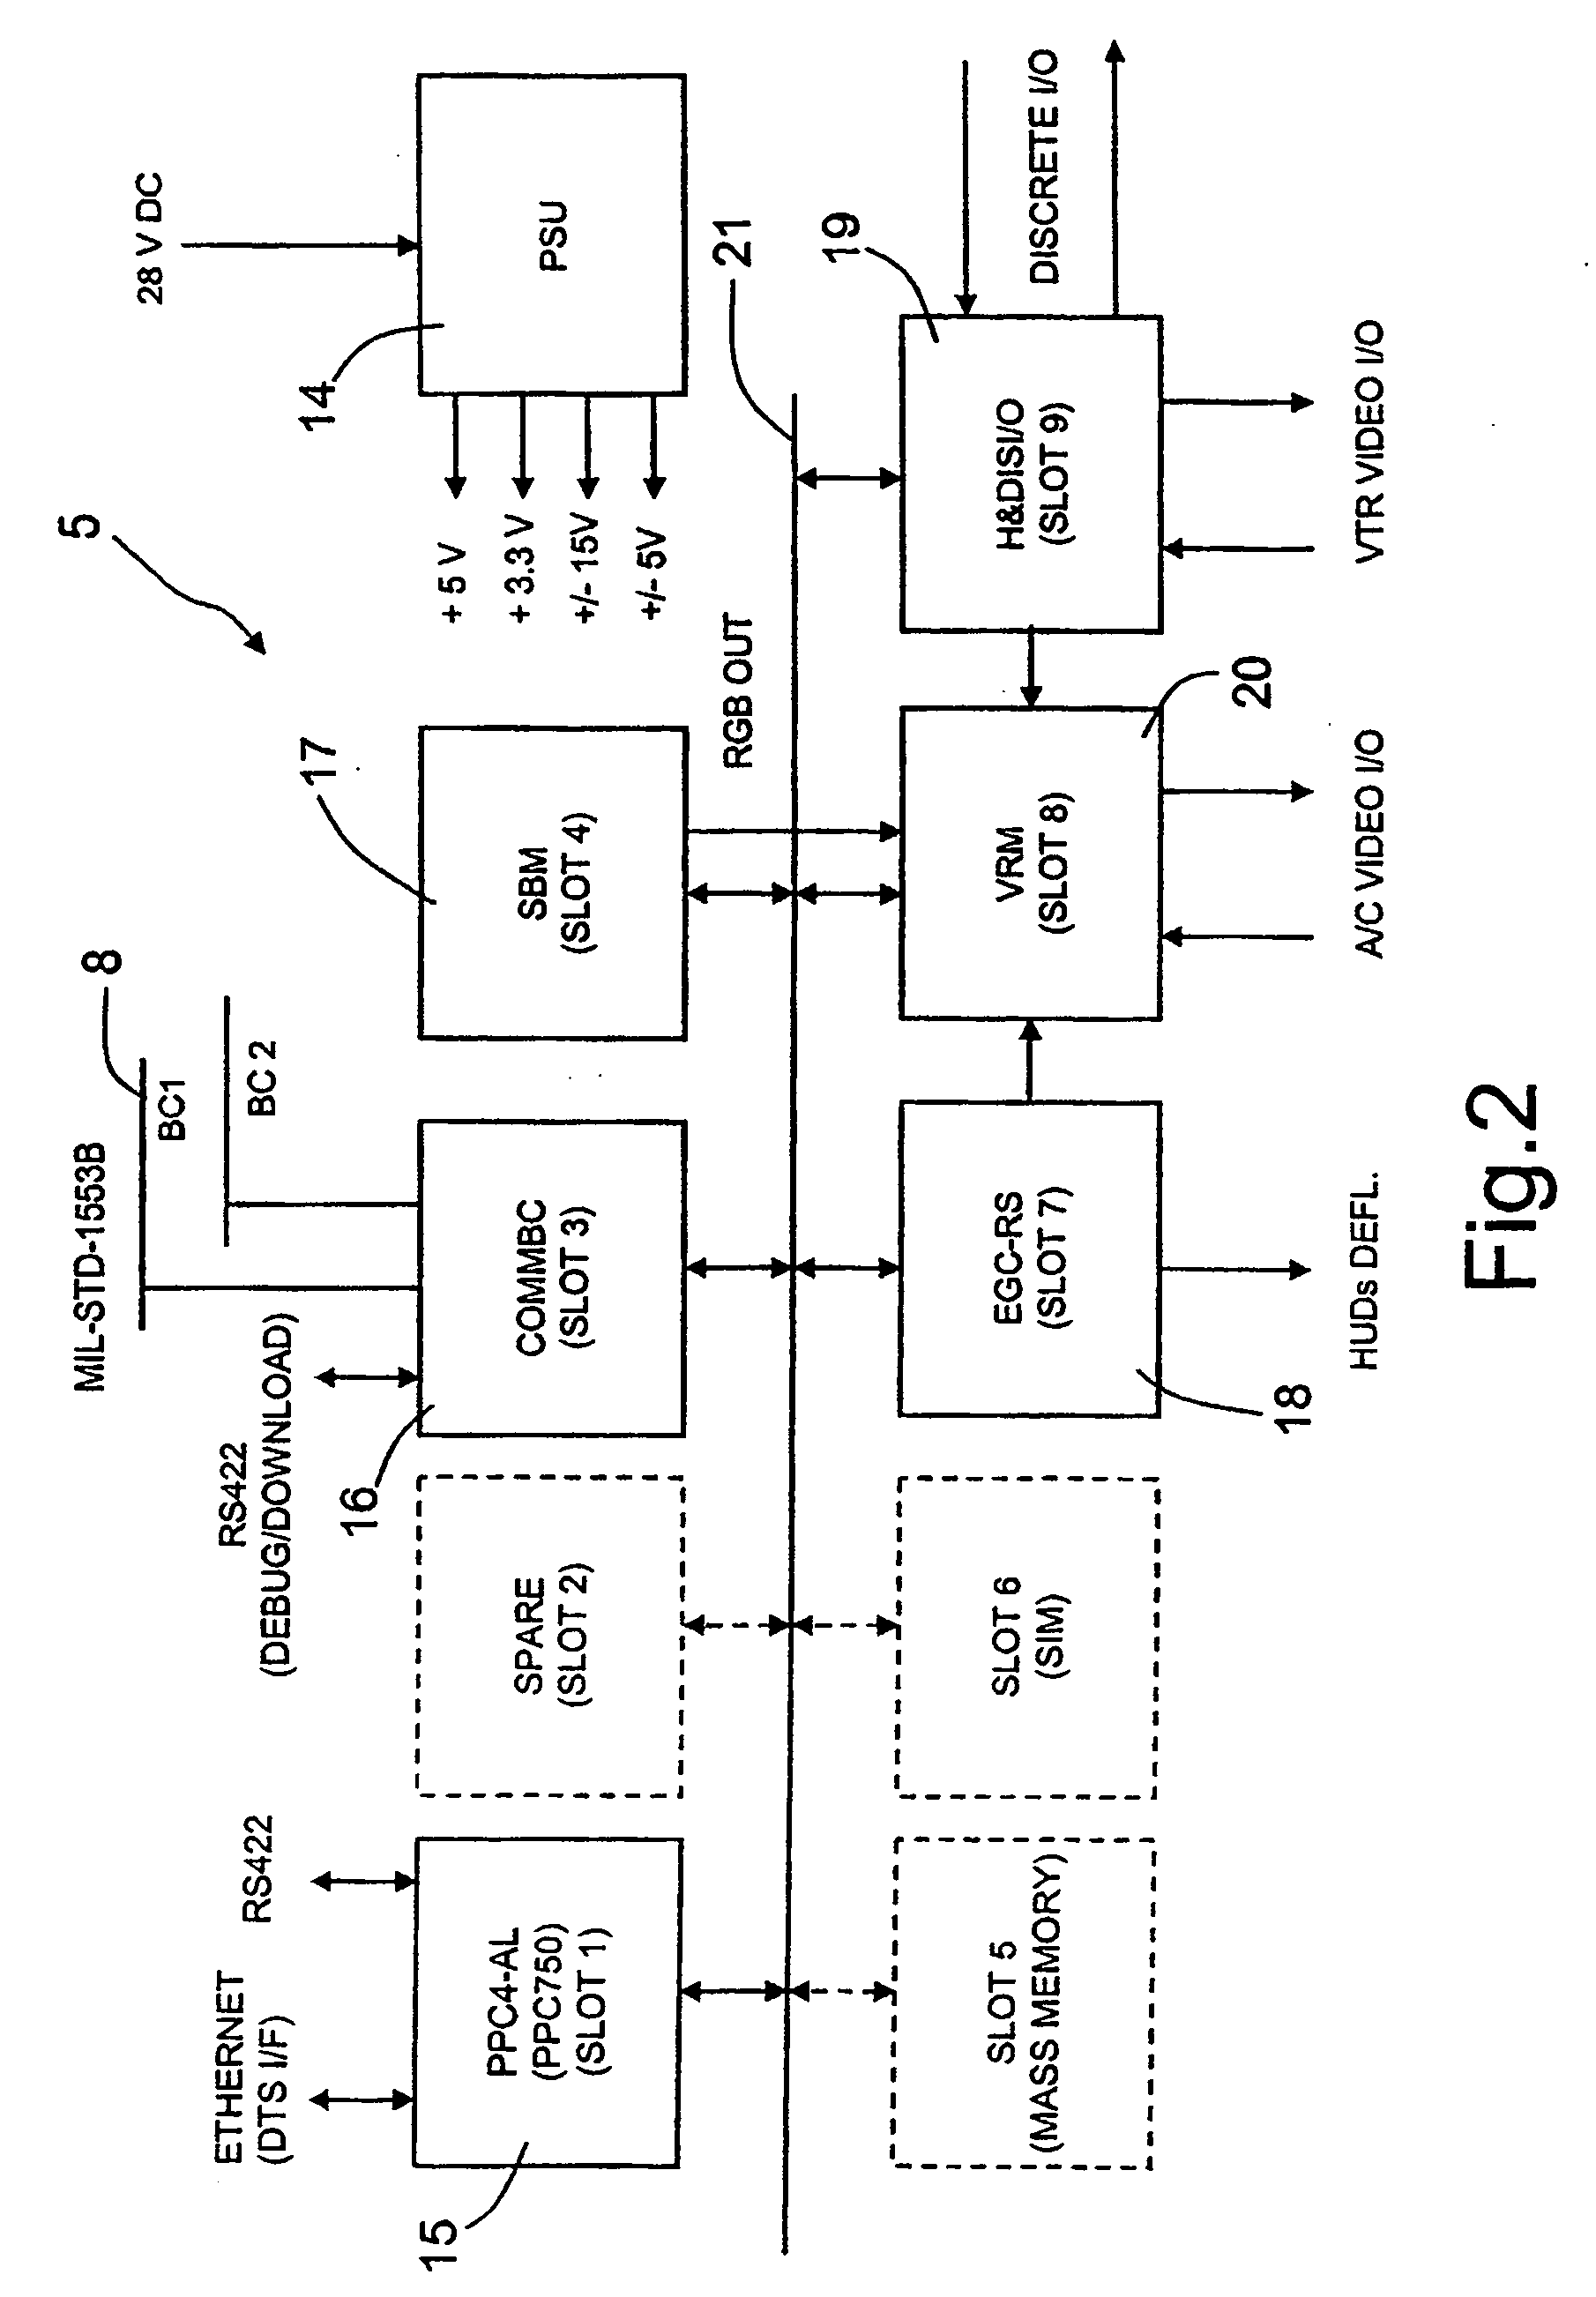 Method and software product for managing data exchange in a high-dynamics safety-critical system